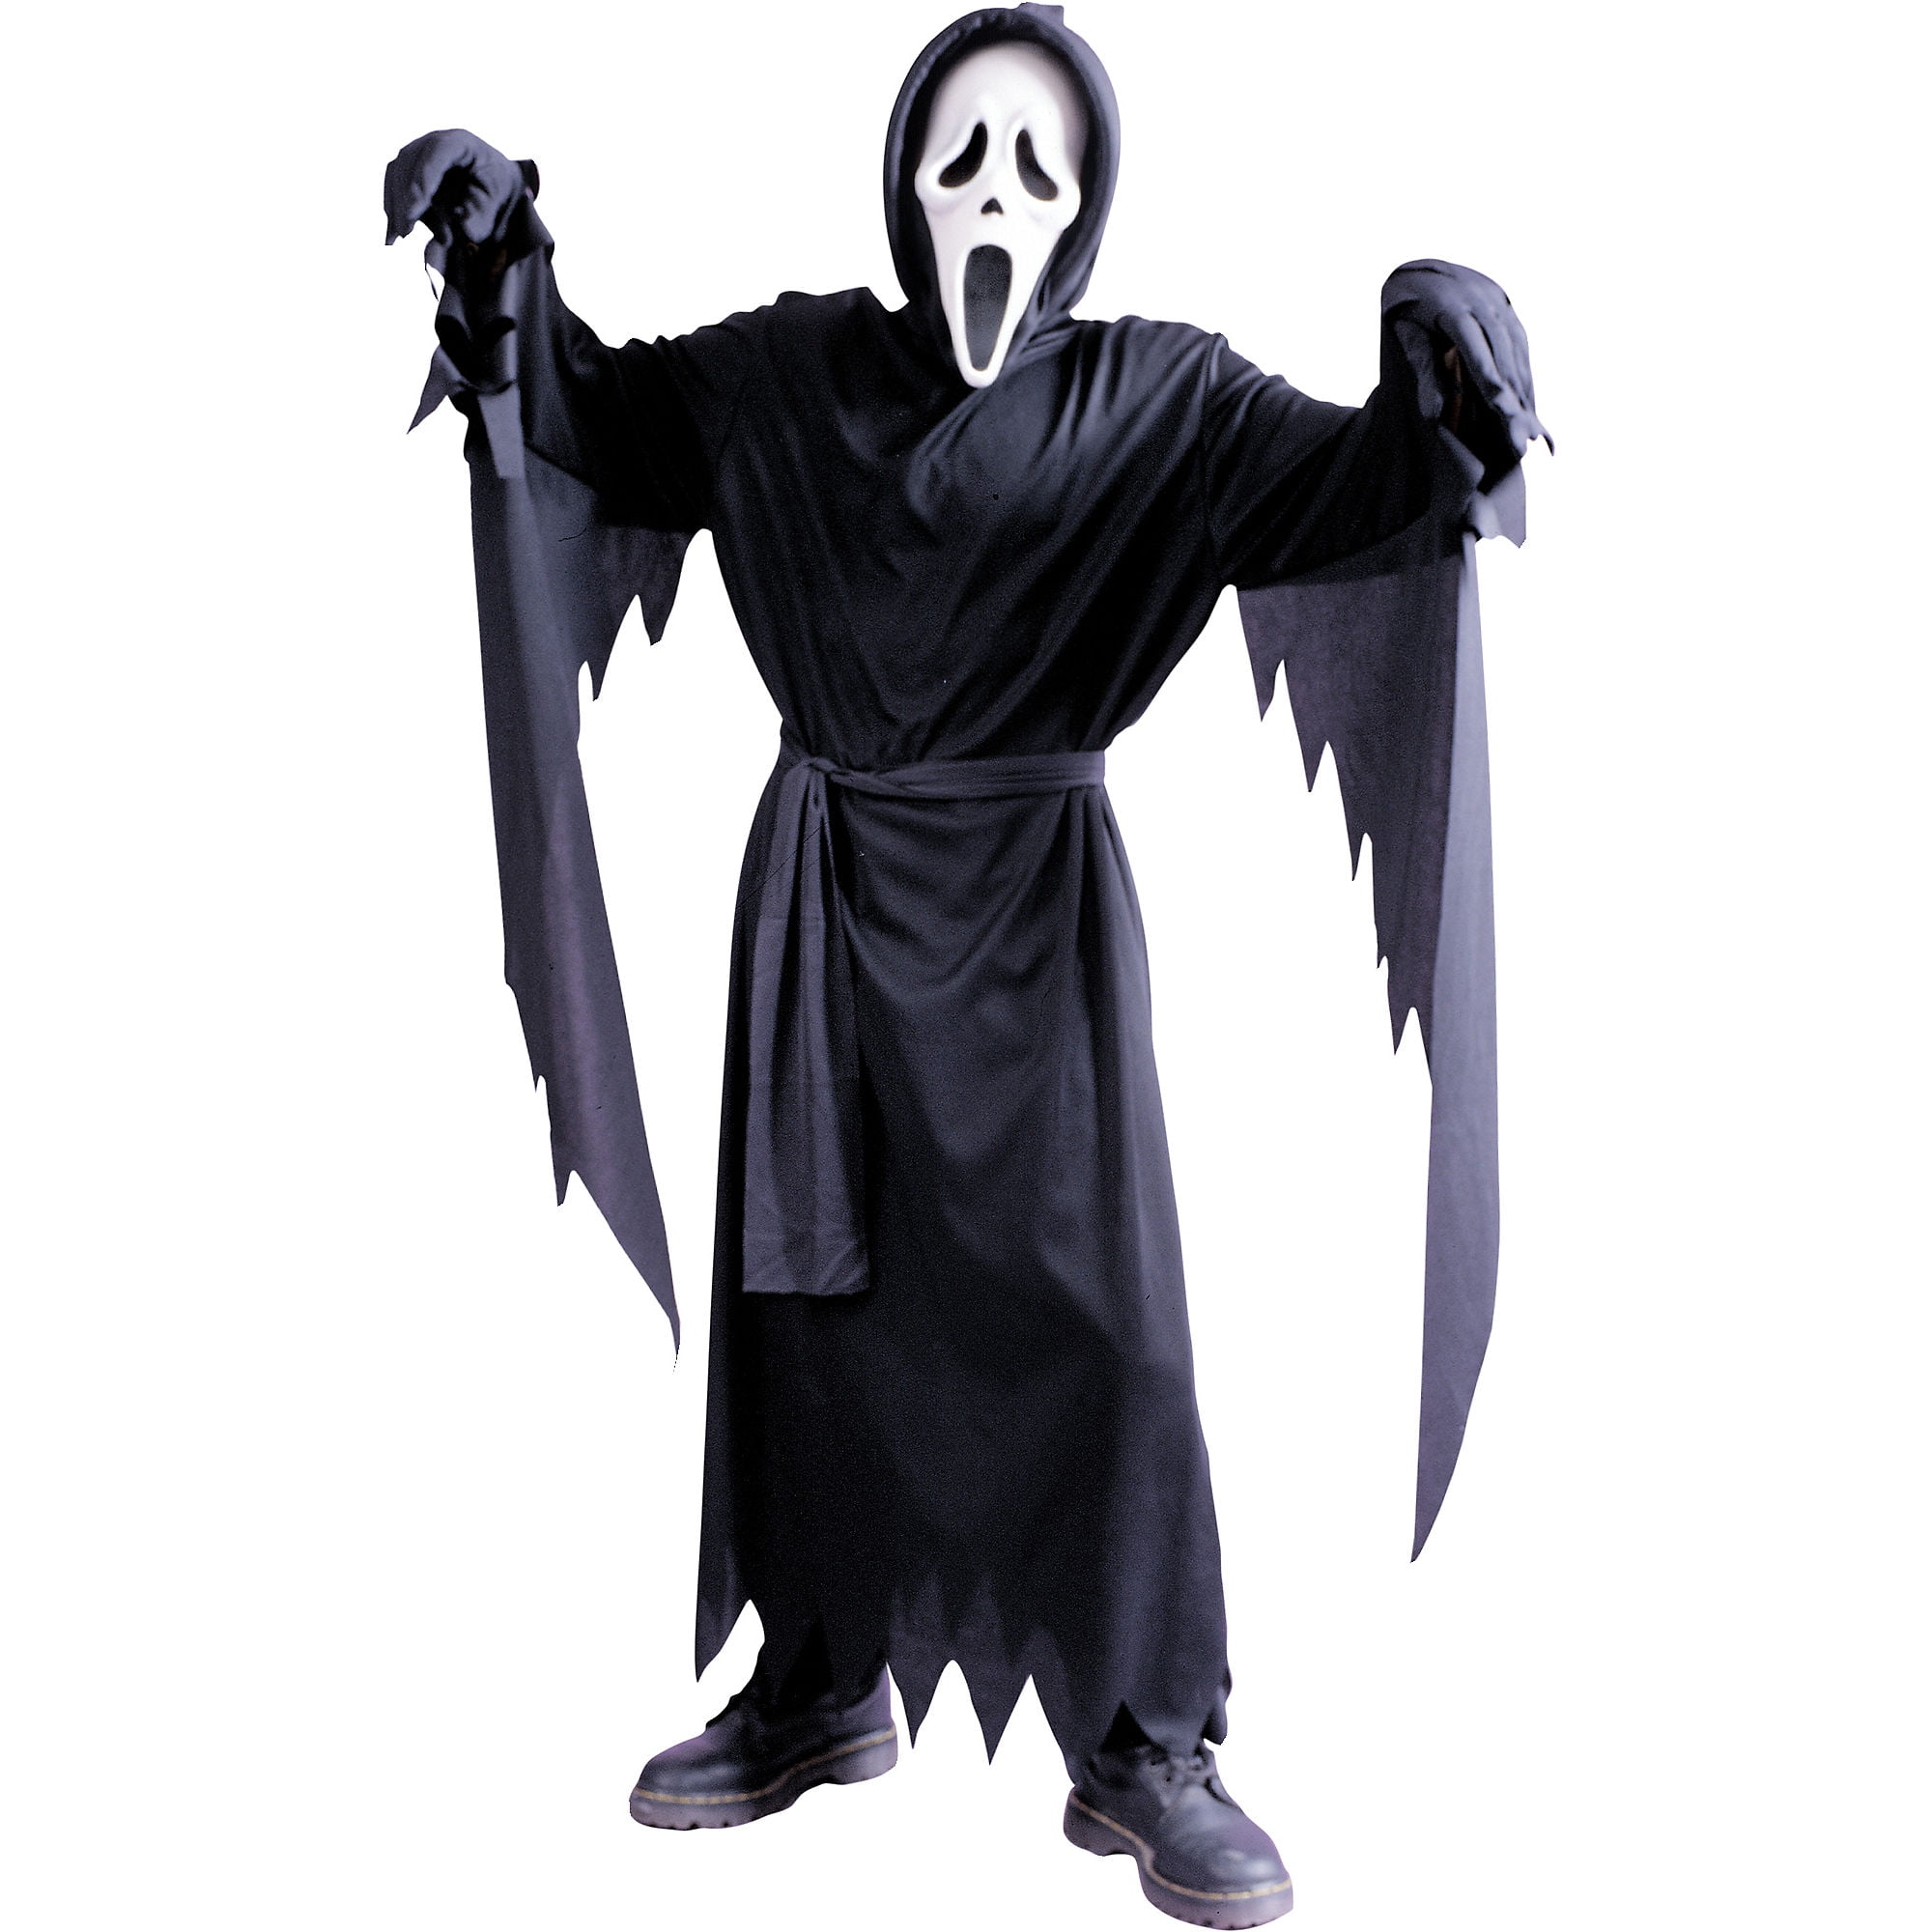 Boys Ghastly Ghoul Halloween Fancy Dress Outfit Costume 